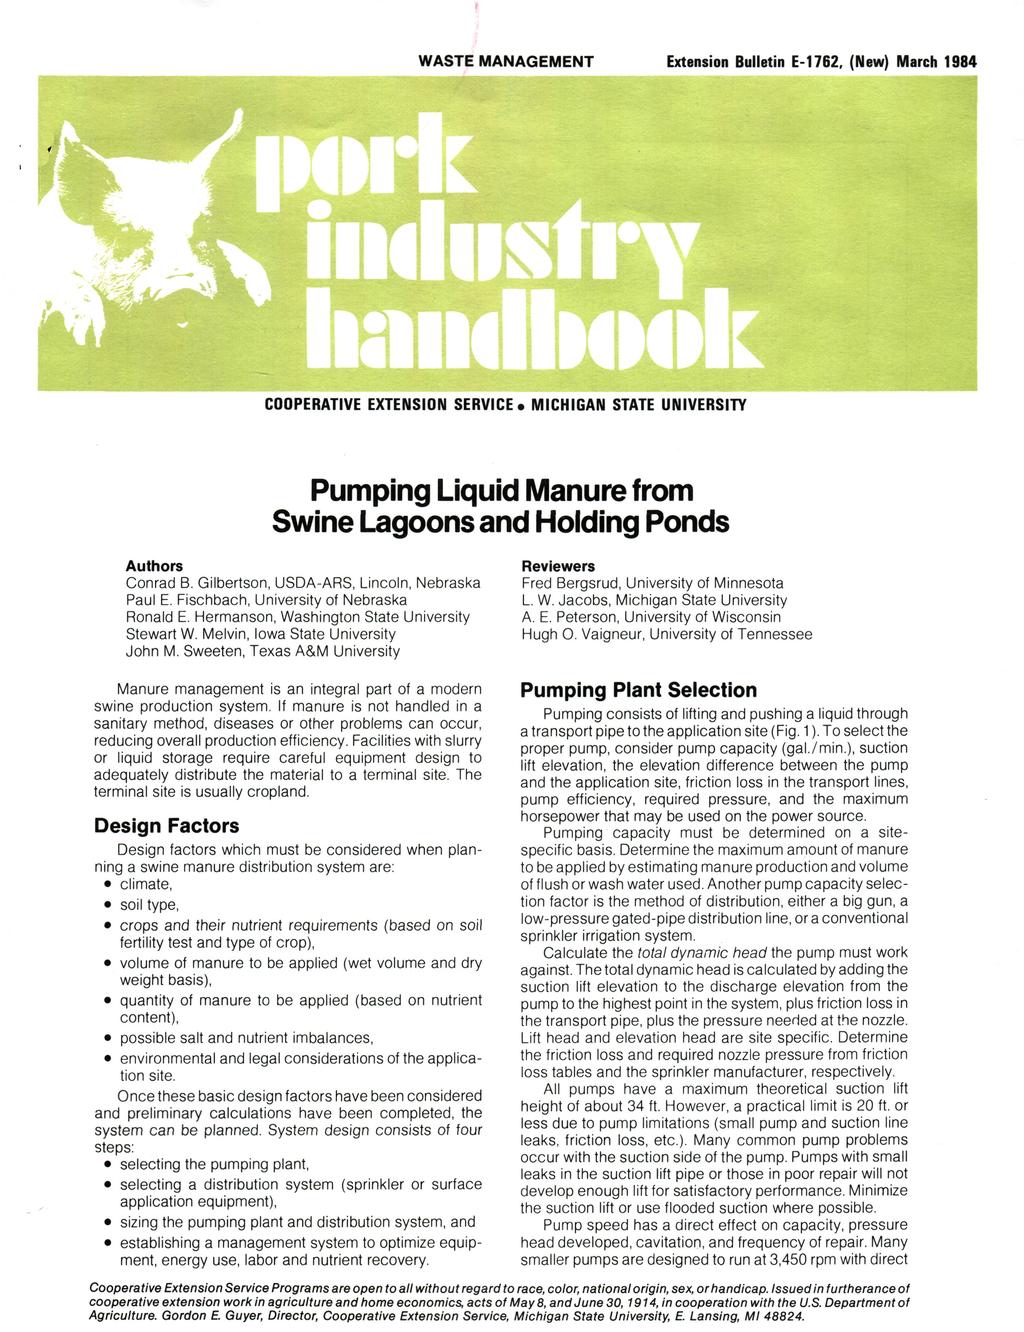 WASTE MANAGEMENT Extension Bulletin E-76, (New) March 984 I COOPERATIVE EXTENSION SERVICE. MICHIGAN STATE UNIVERSITY Pumping Liquid Manure from Swine Lagoons and Holding Ponds Authors Conrad B.